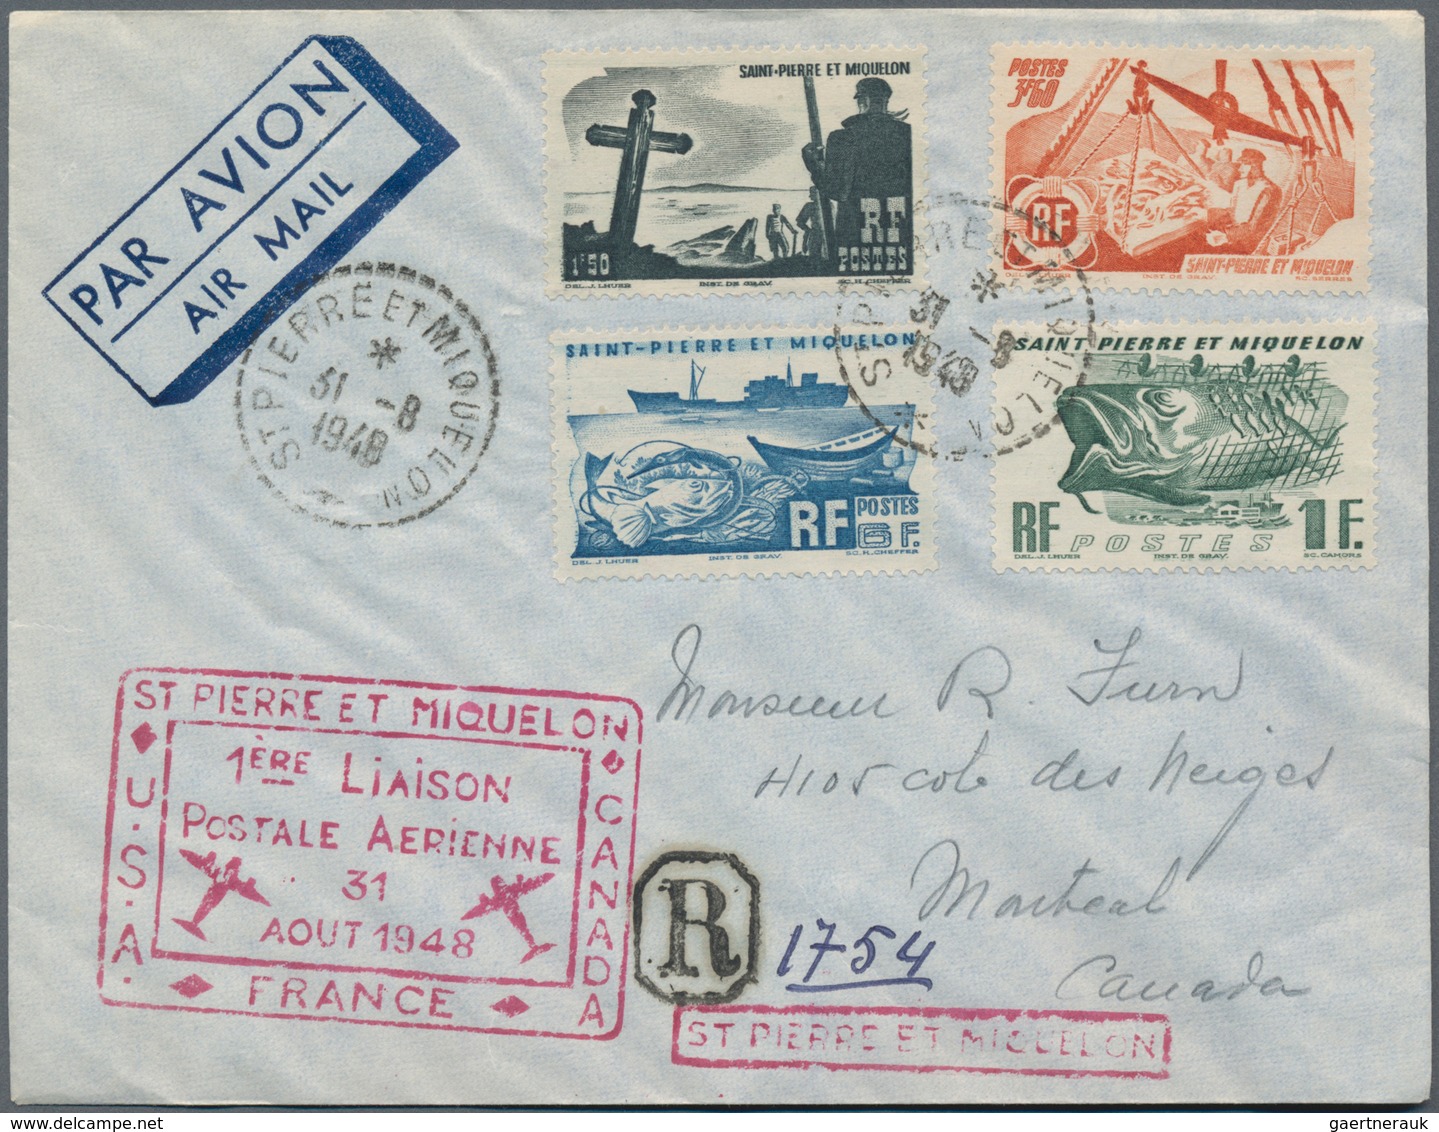 St. Pierre und Miquelon: 1923/2006, assortment of apprx. 57 covers/cards with many attractive and in